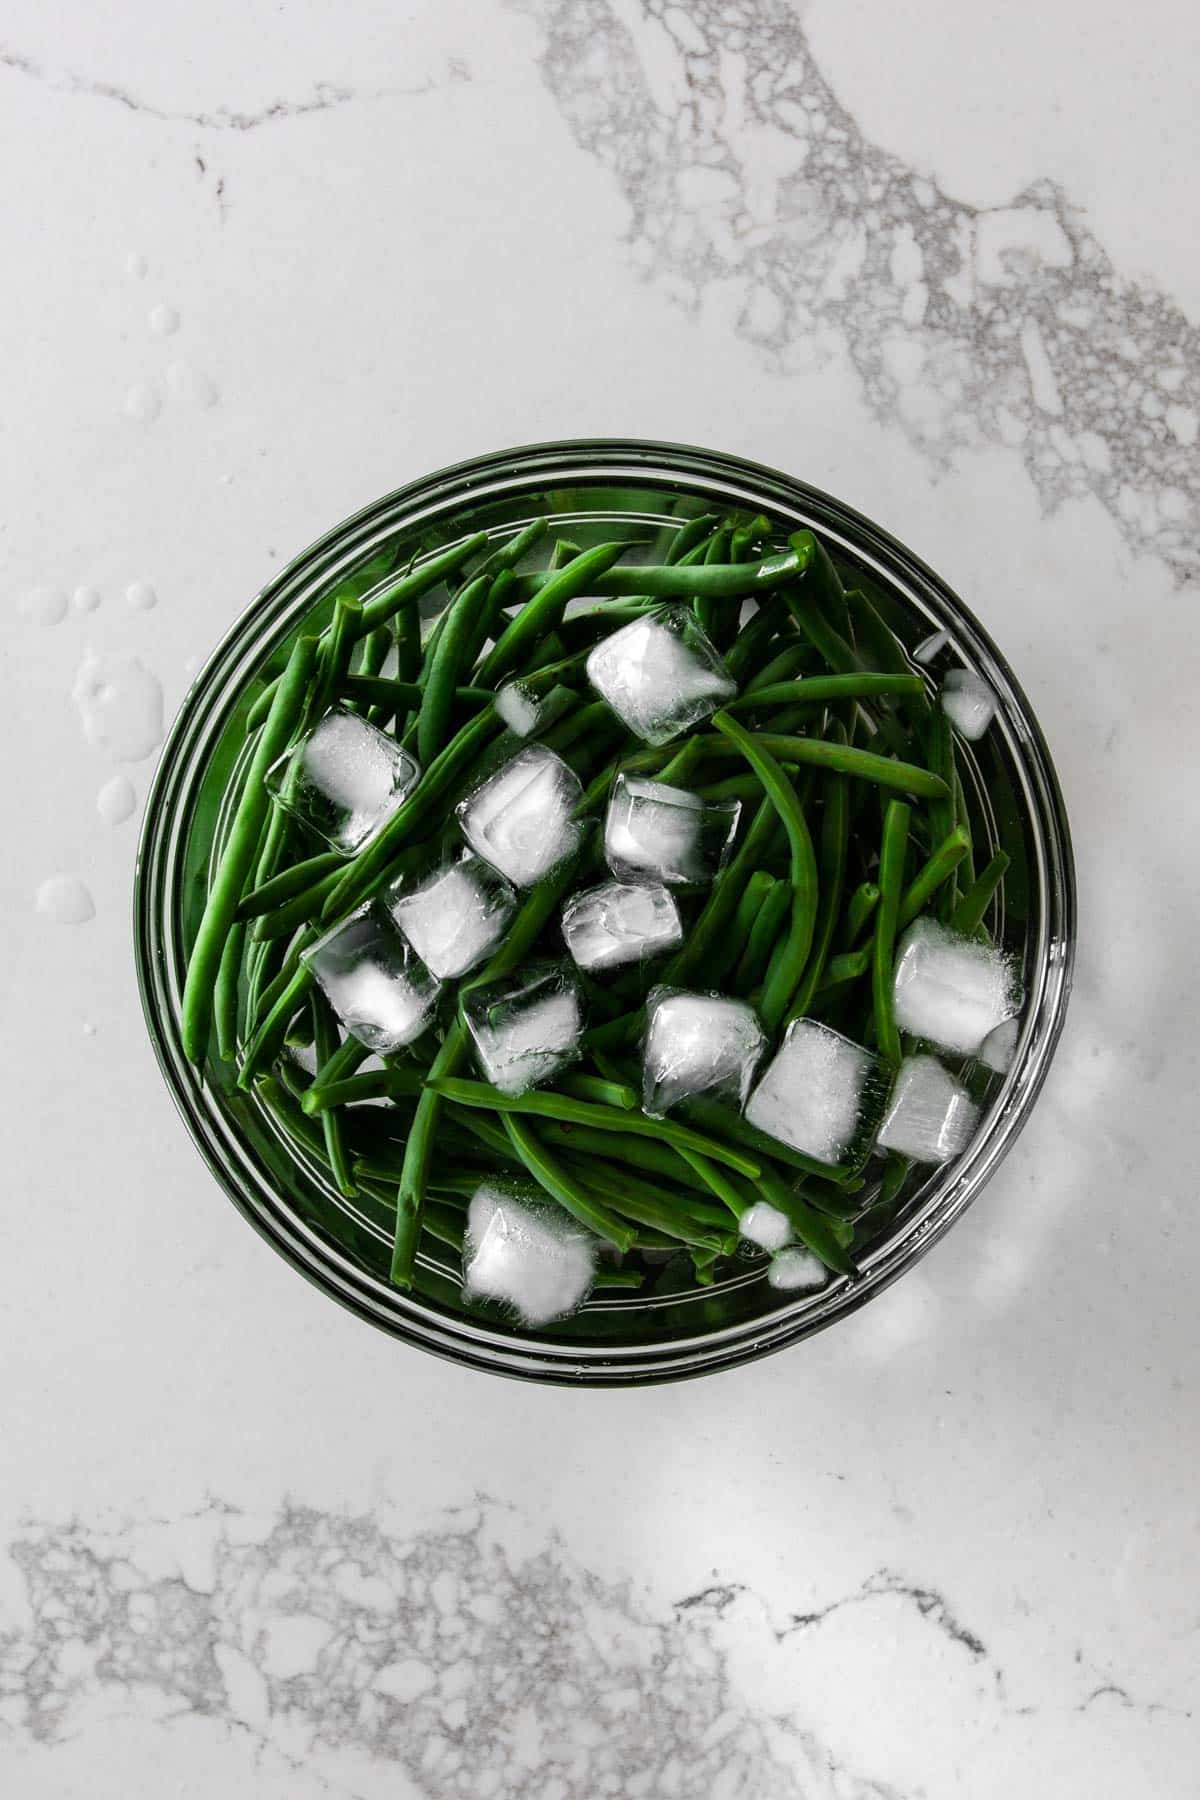 Green Beans in ice water